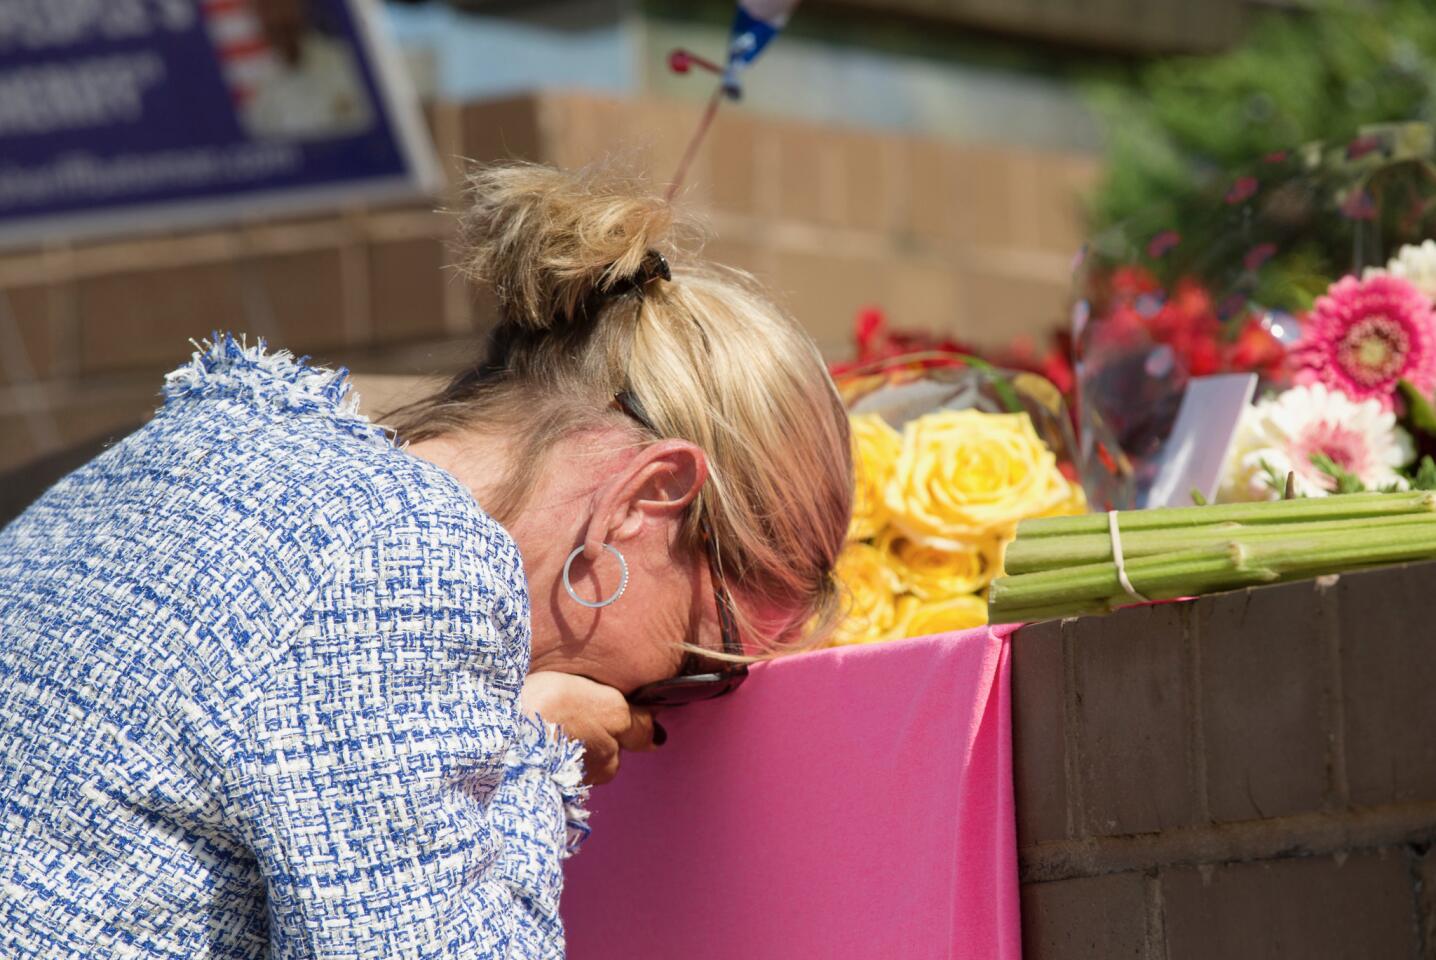 An unidentified mourner grieves at a small memorial set up at the entrance of 888 Bestgate Road on Friday, June 29, 2018. A gunman blasted his way into the Capital Gazette newsroom in Annapolis with a shotgun Thursday afternoon, killing five people and injuring two others, authorities said.